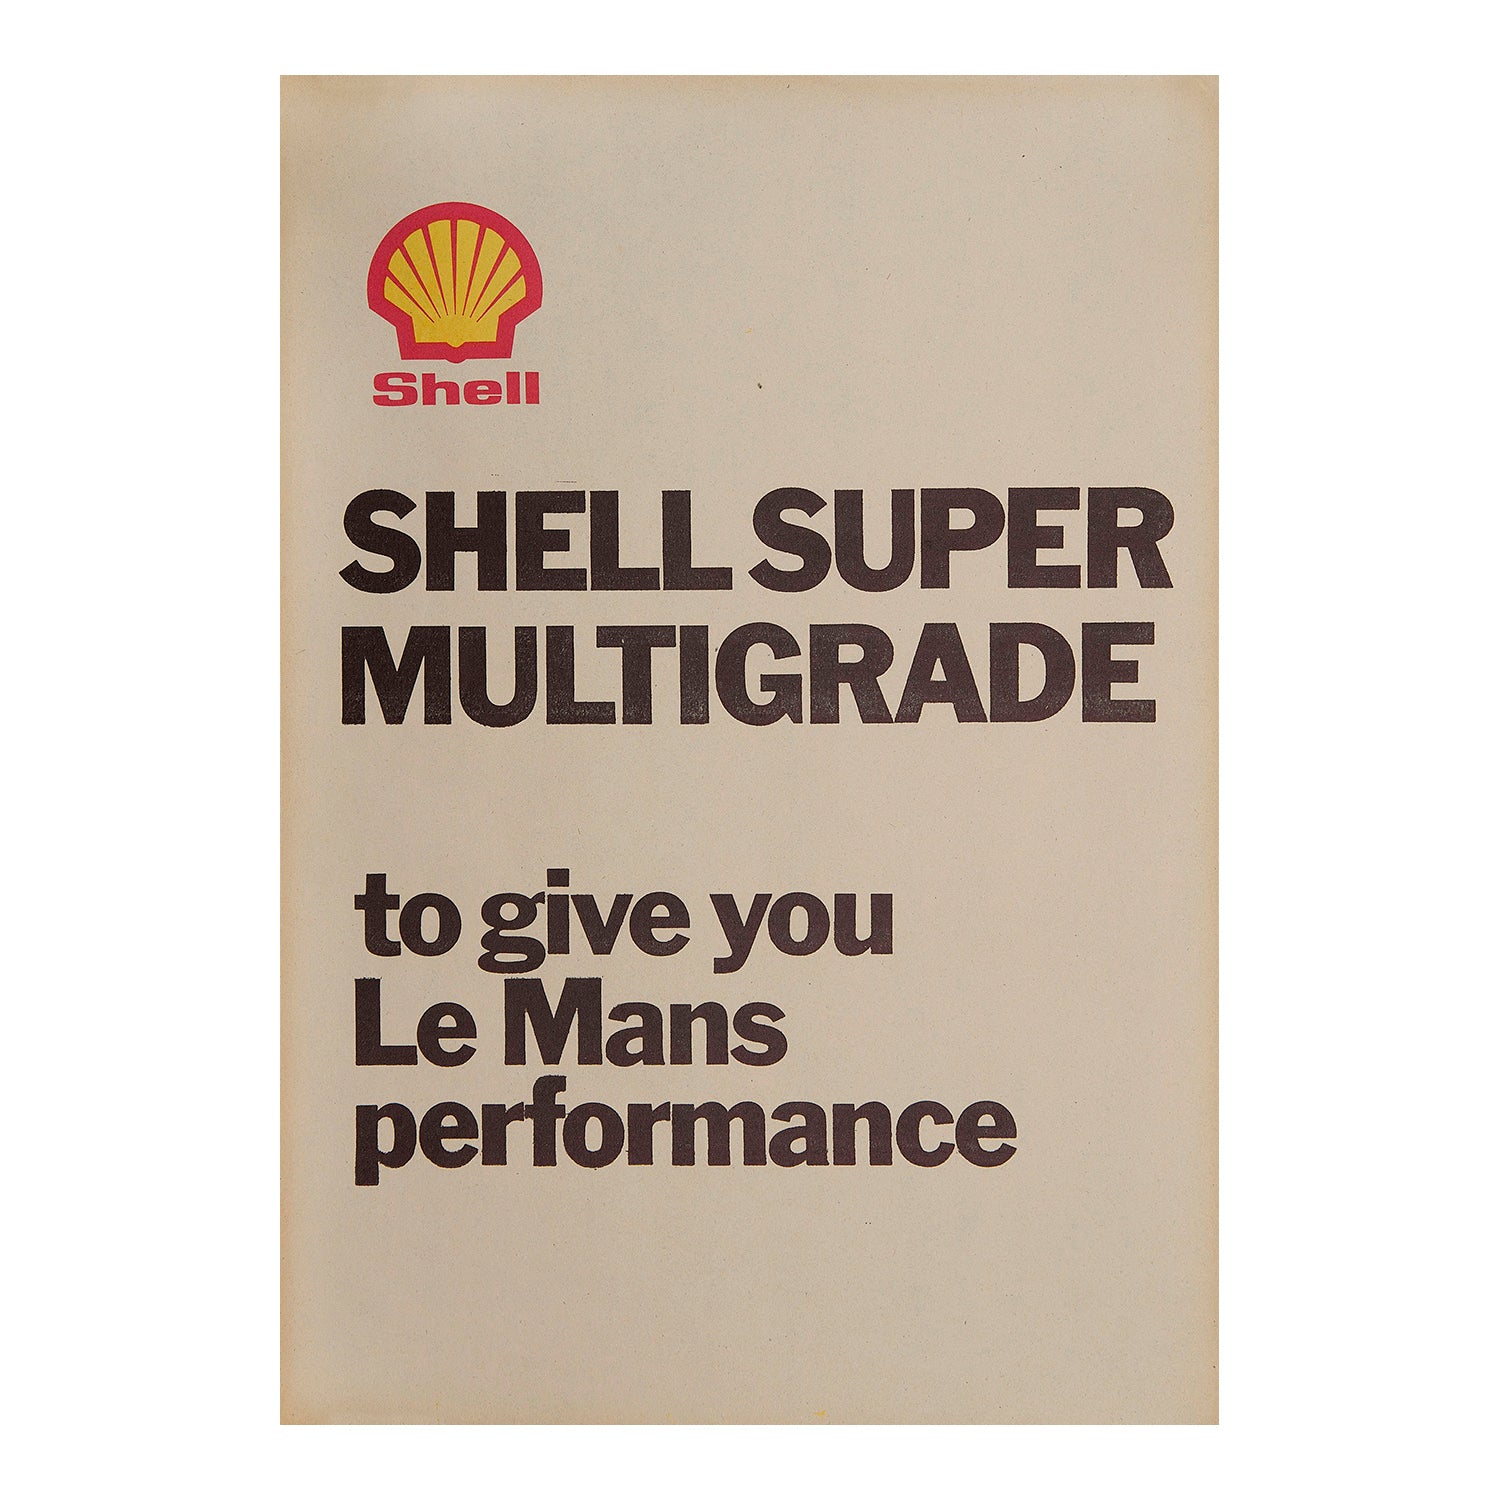 Shell Super Multigrade to give you Le Mans performance